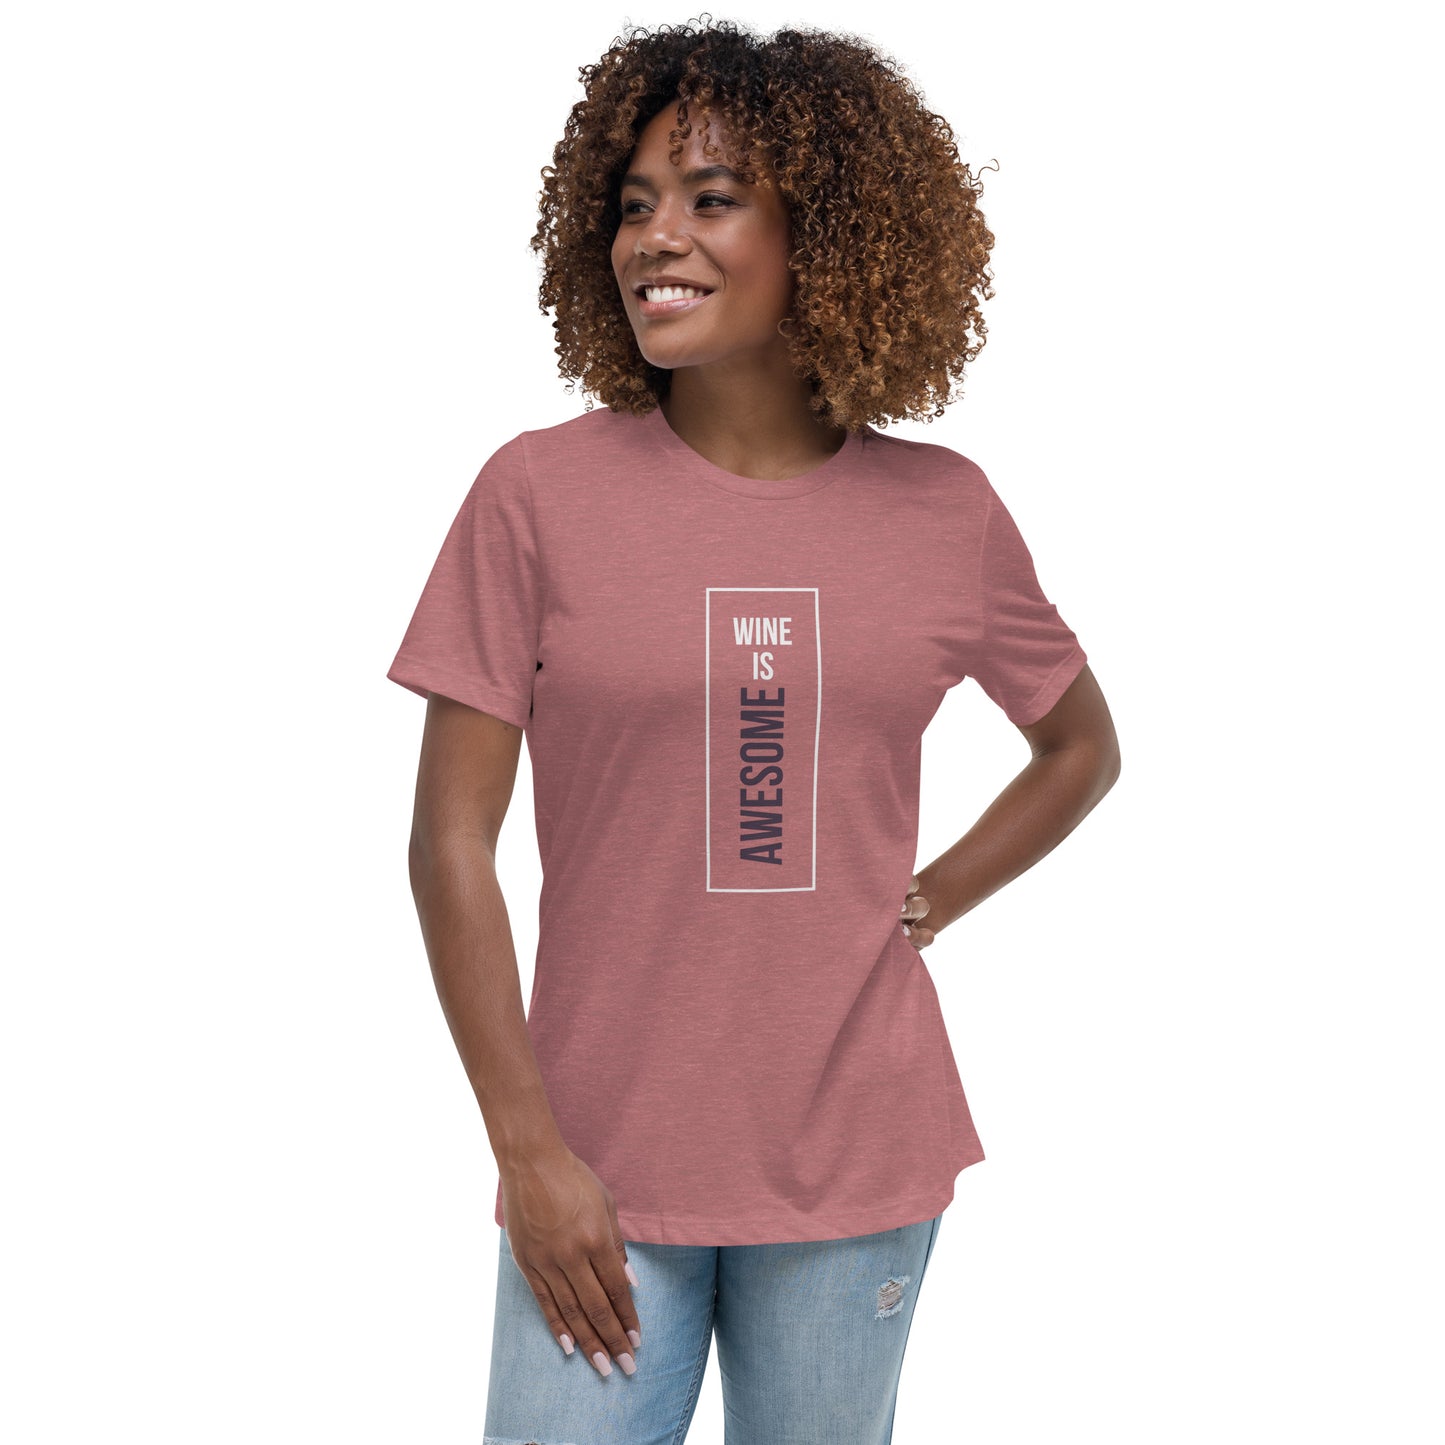 Wine Is Awesome Women's T-Shirt